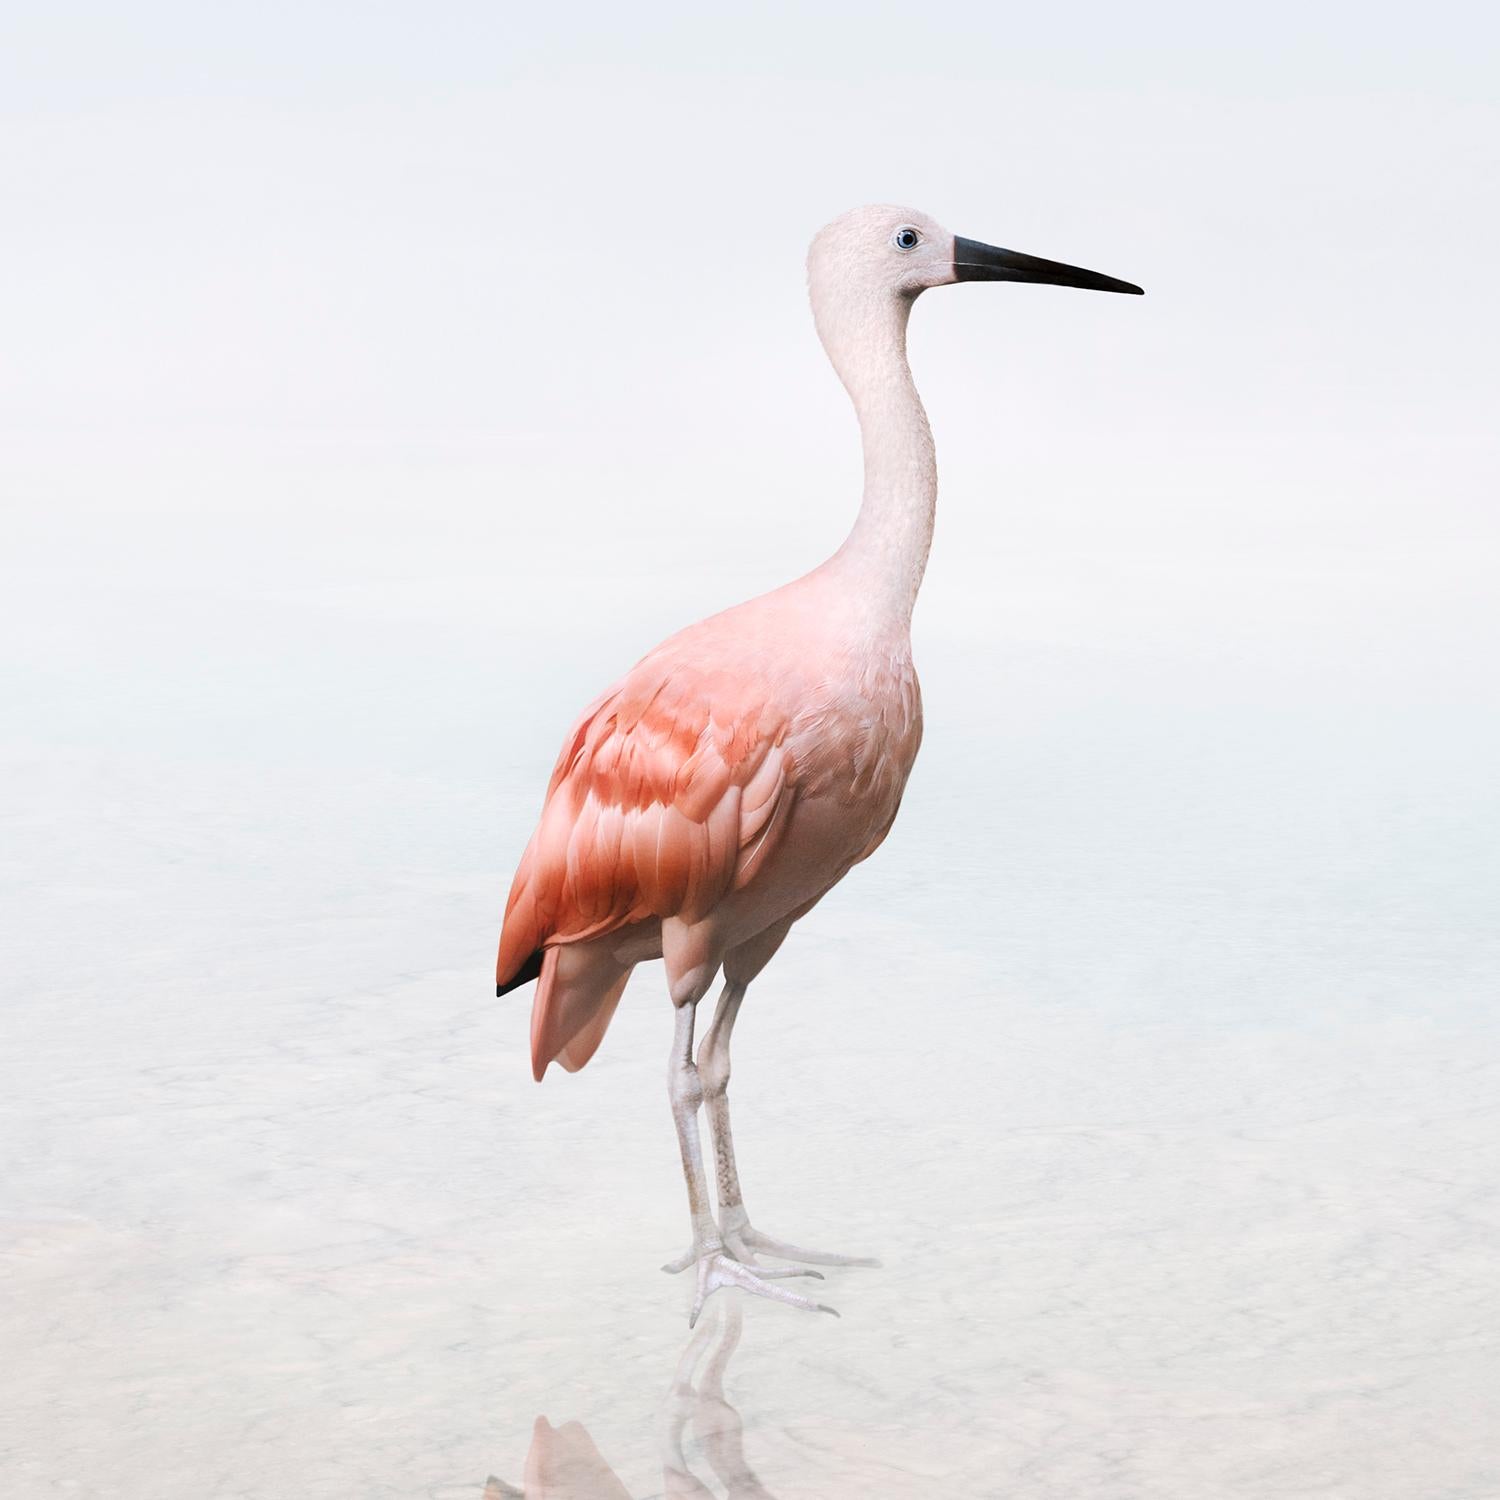 Surrender Scarlet Ibis - animal photography, color photography - Photograph by Alice Zilberberg